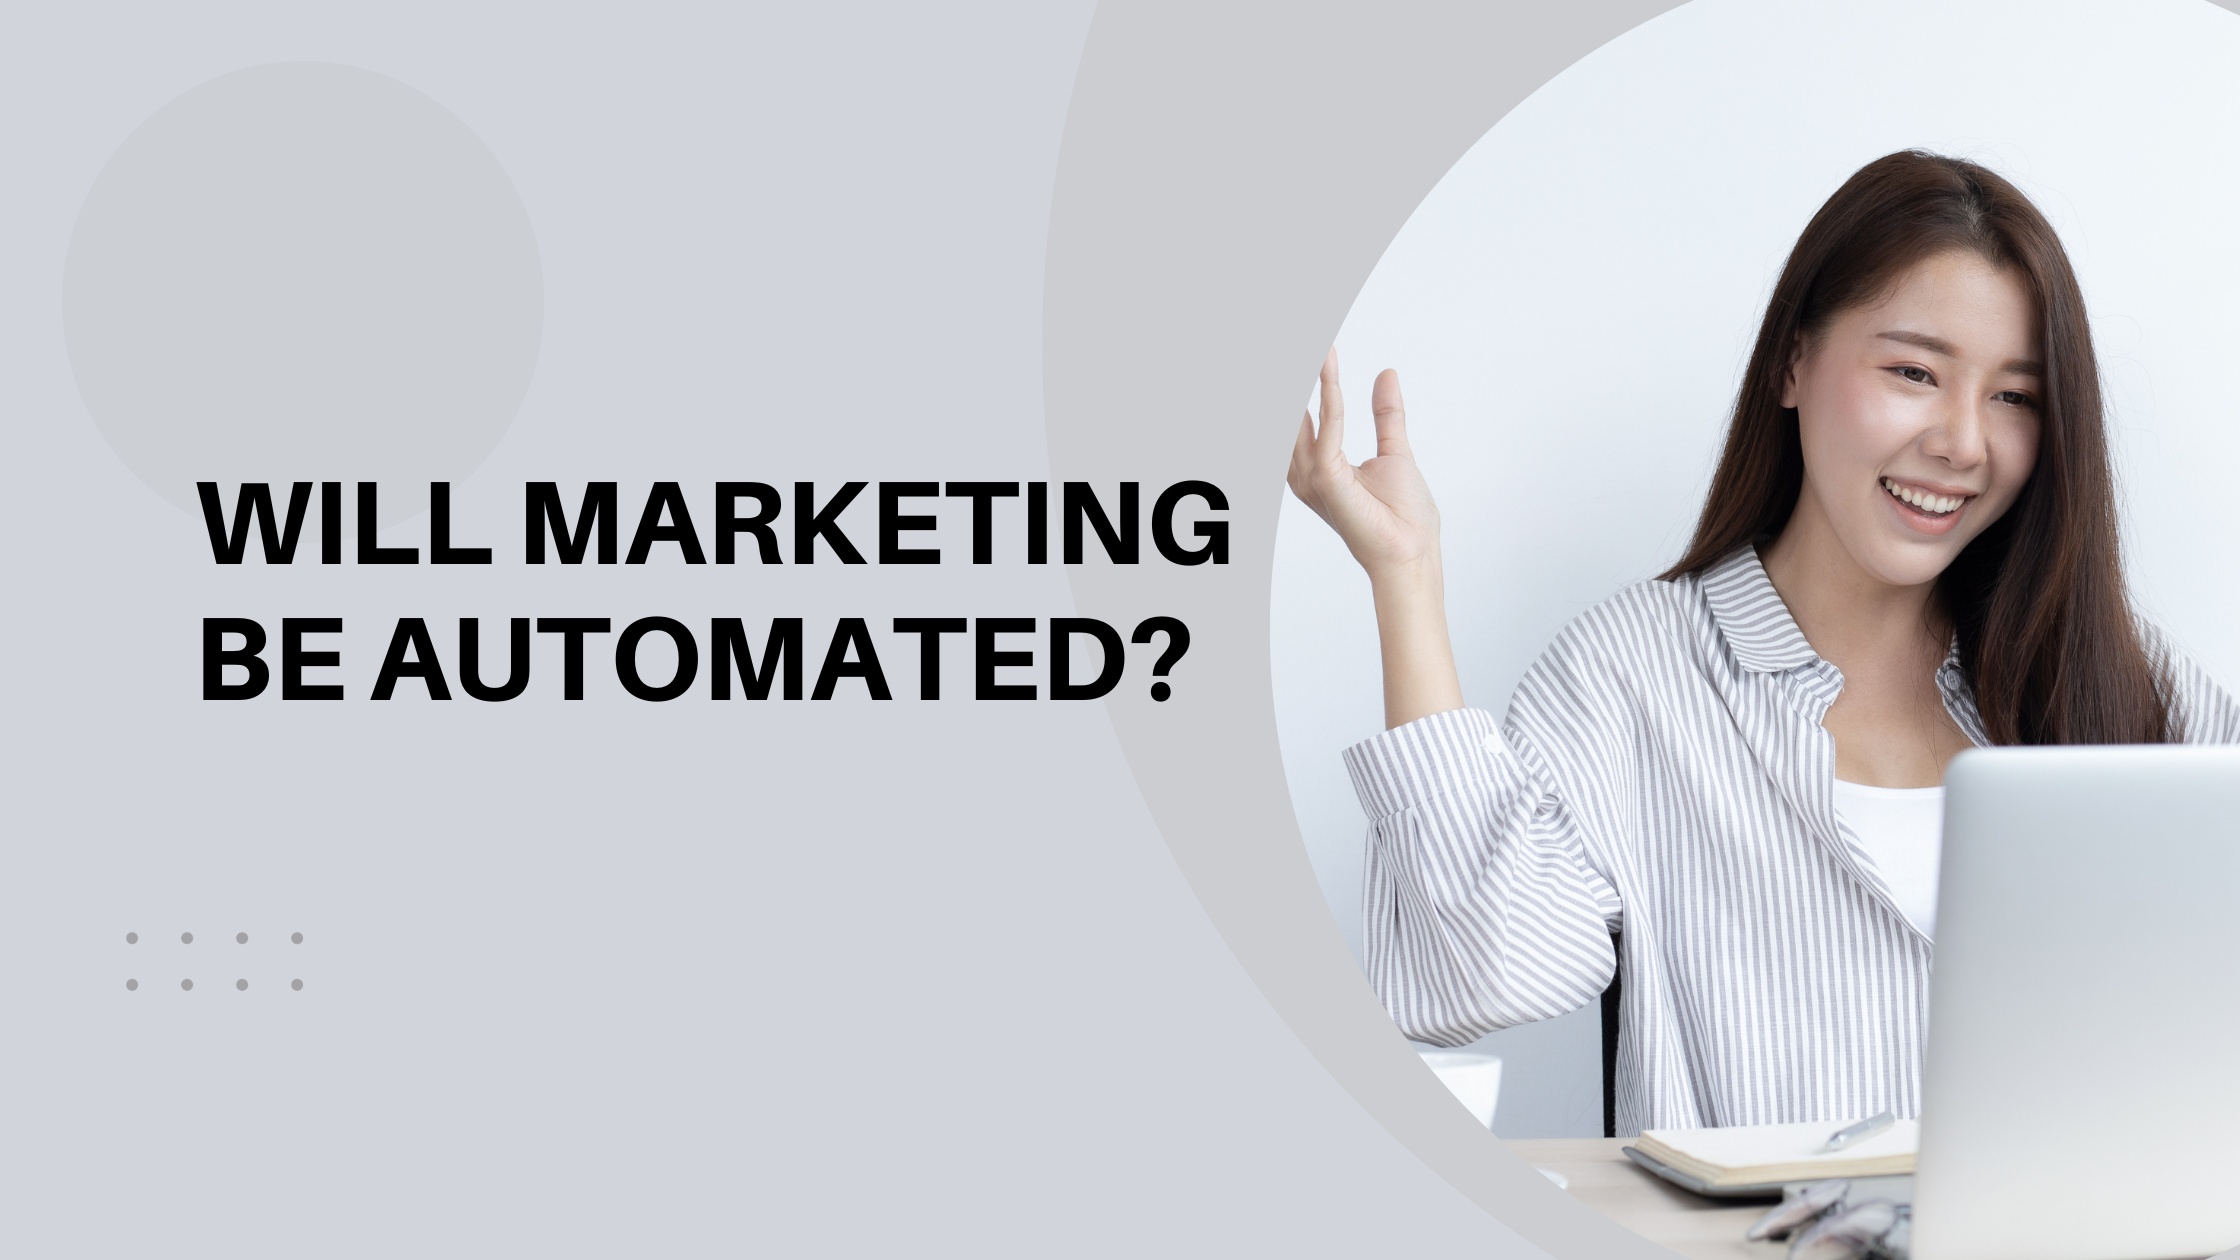 Will marketing be automated?